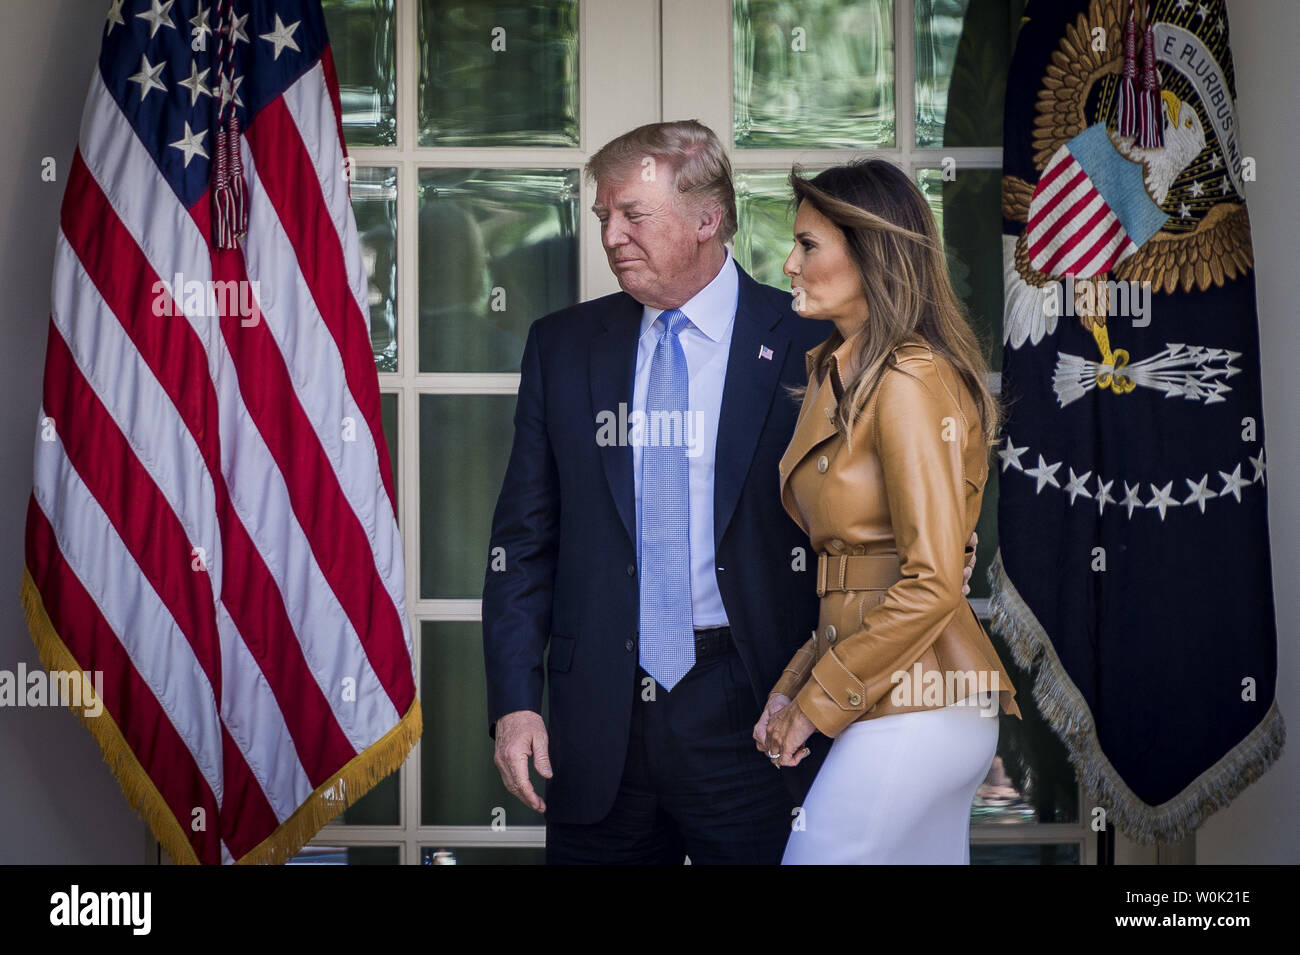 President Donald Trump and First Lady Melania Trump make their way to the  Oval Office following the First Lady's remarks announcing the launch of her  BE BEST initiative on May 7, 2018